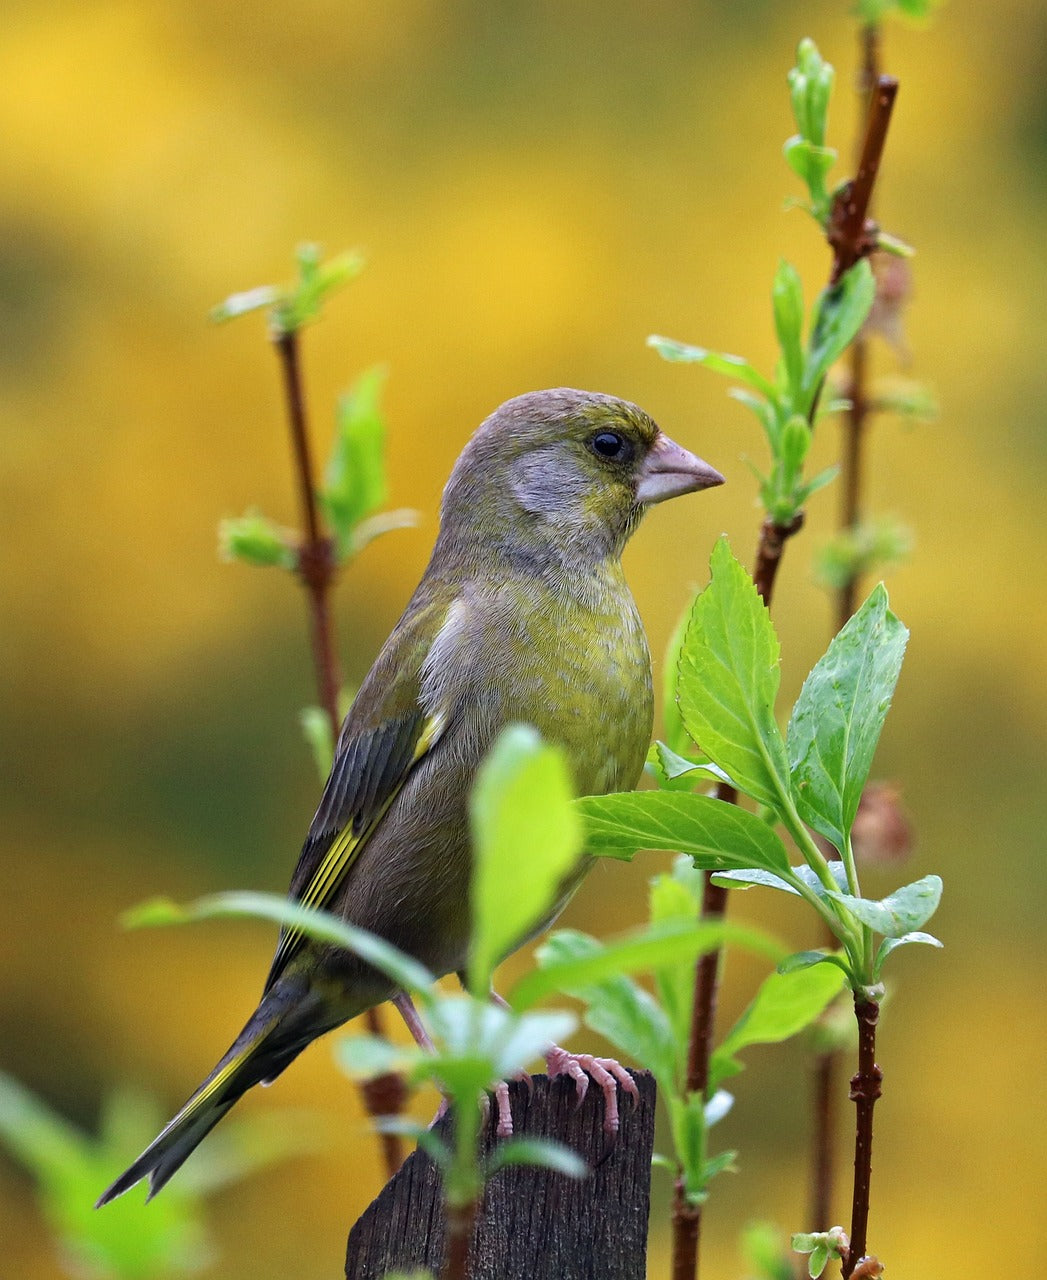 Image of a greenfinch on a branch